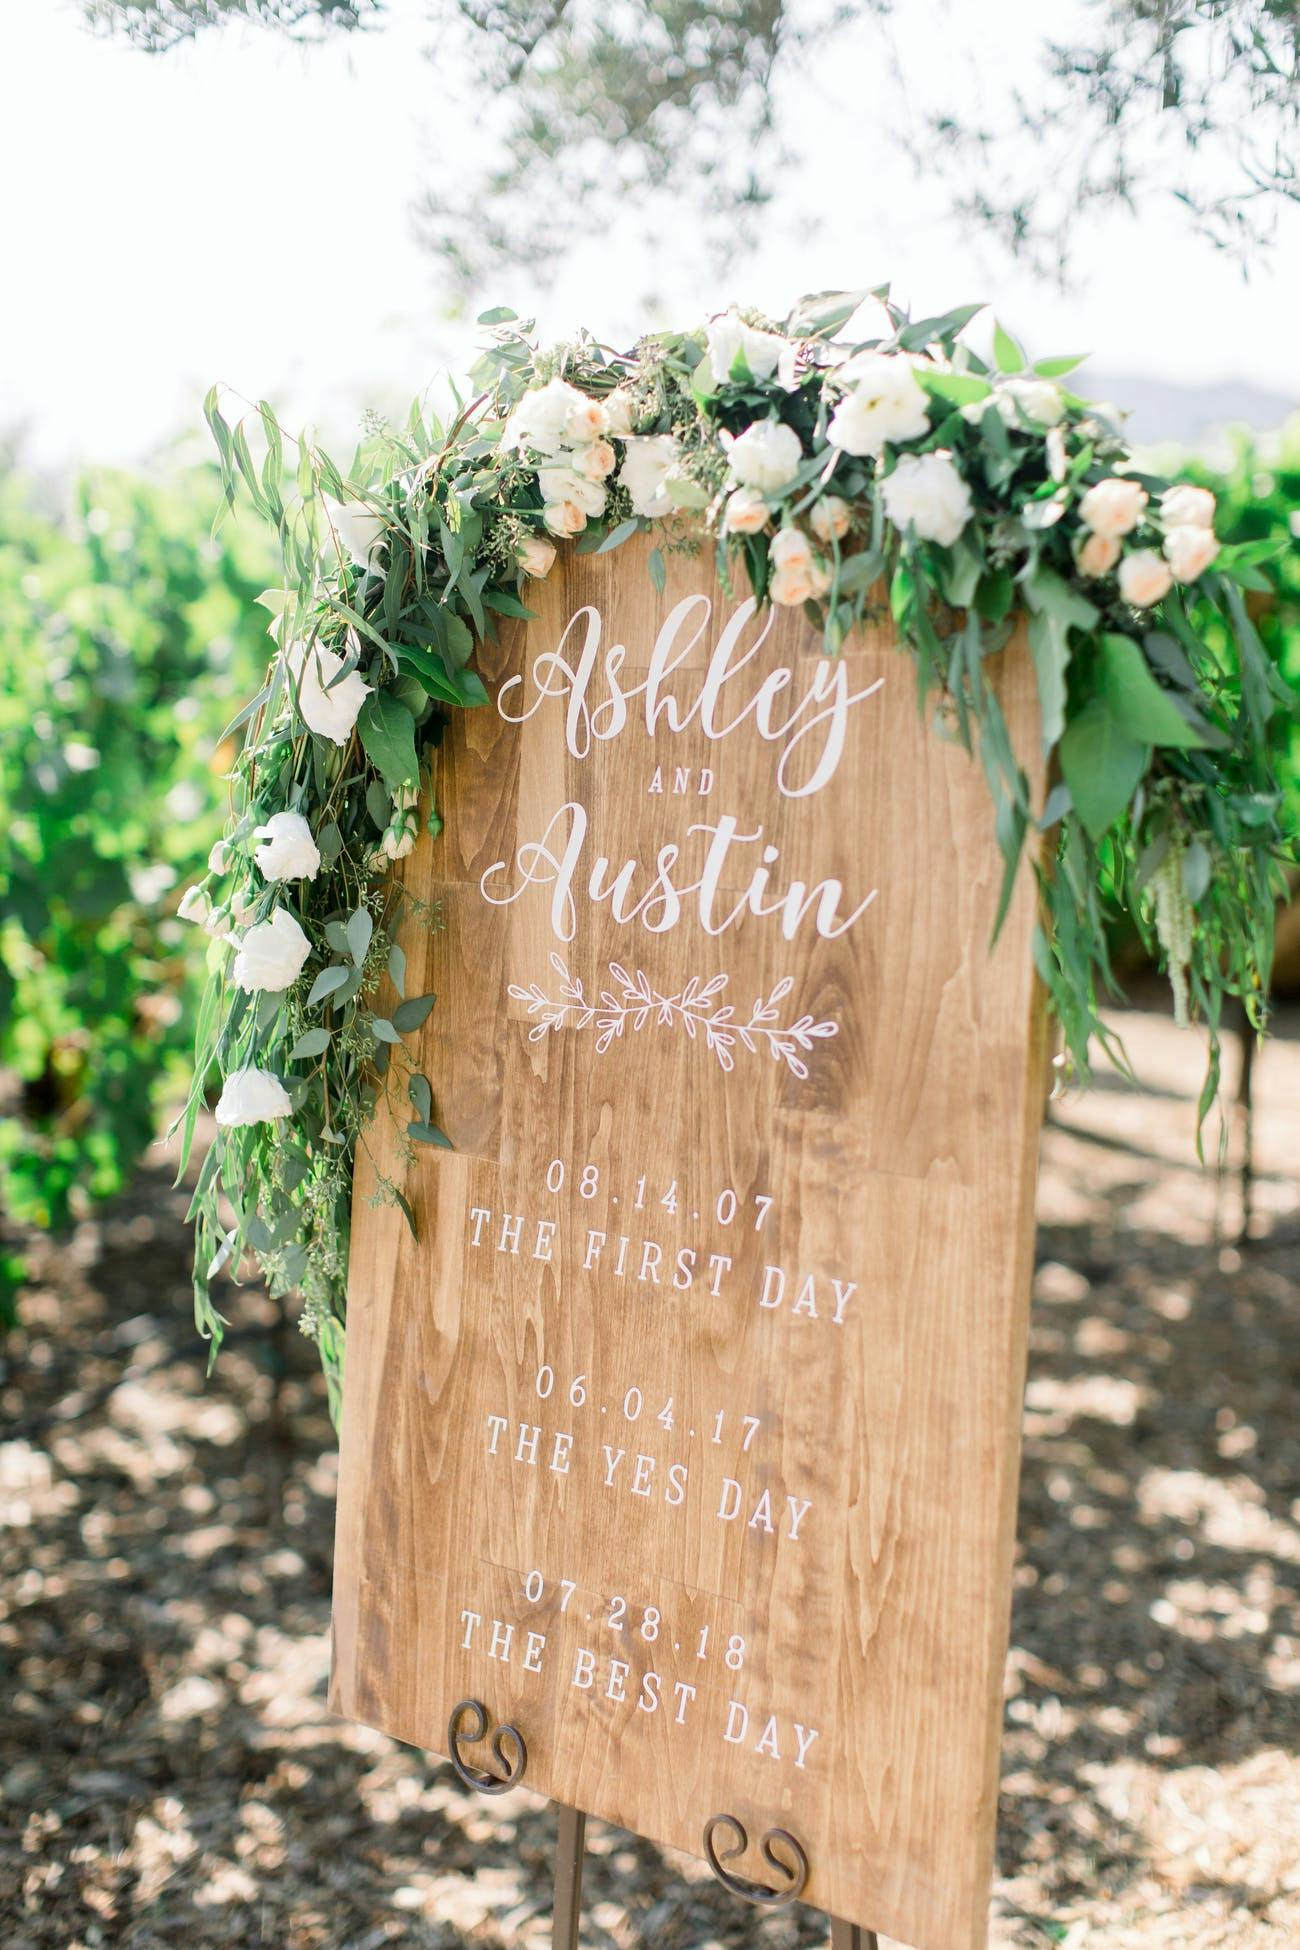 Rustic wedding signage with florals | PartySlate